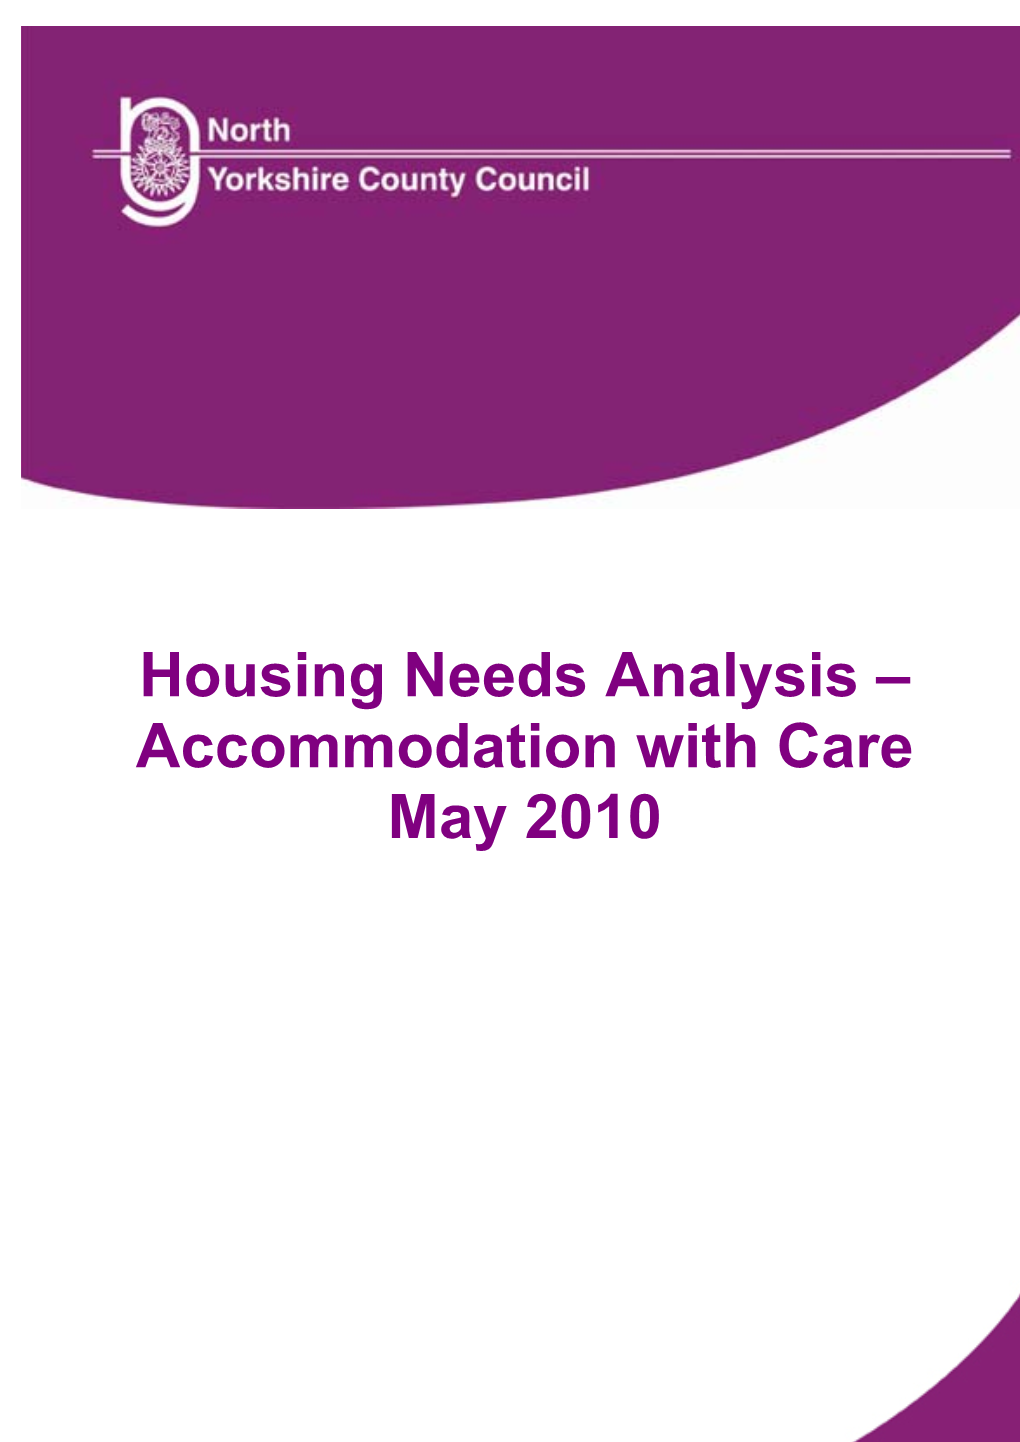 Housing Needs Analysis – Accommodation with Care May 2010